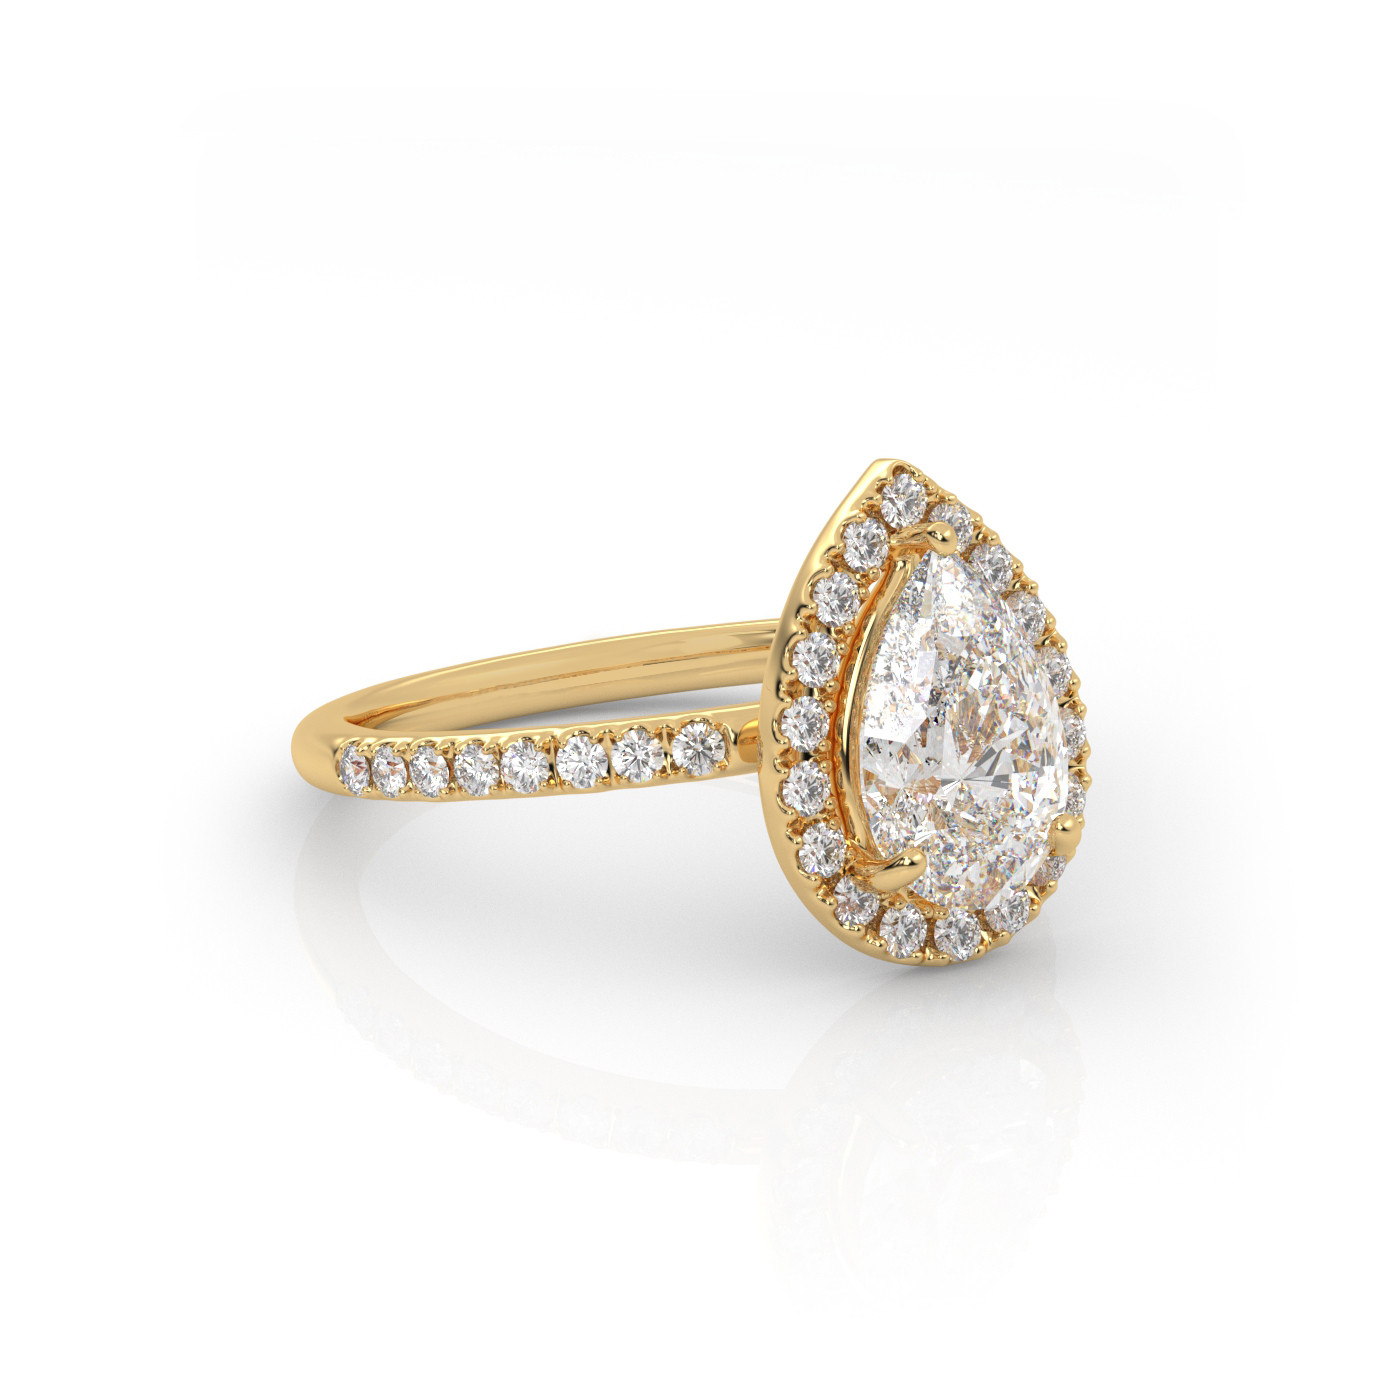 18K YELLOW GOLD Pear Shaped Diamond Engagament Ring with Halo and Pave style